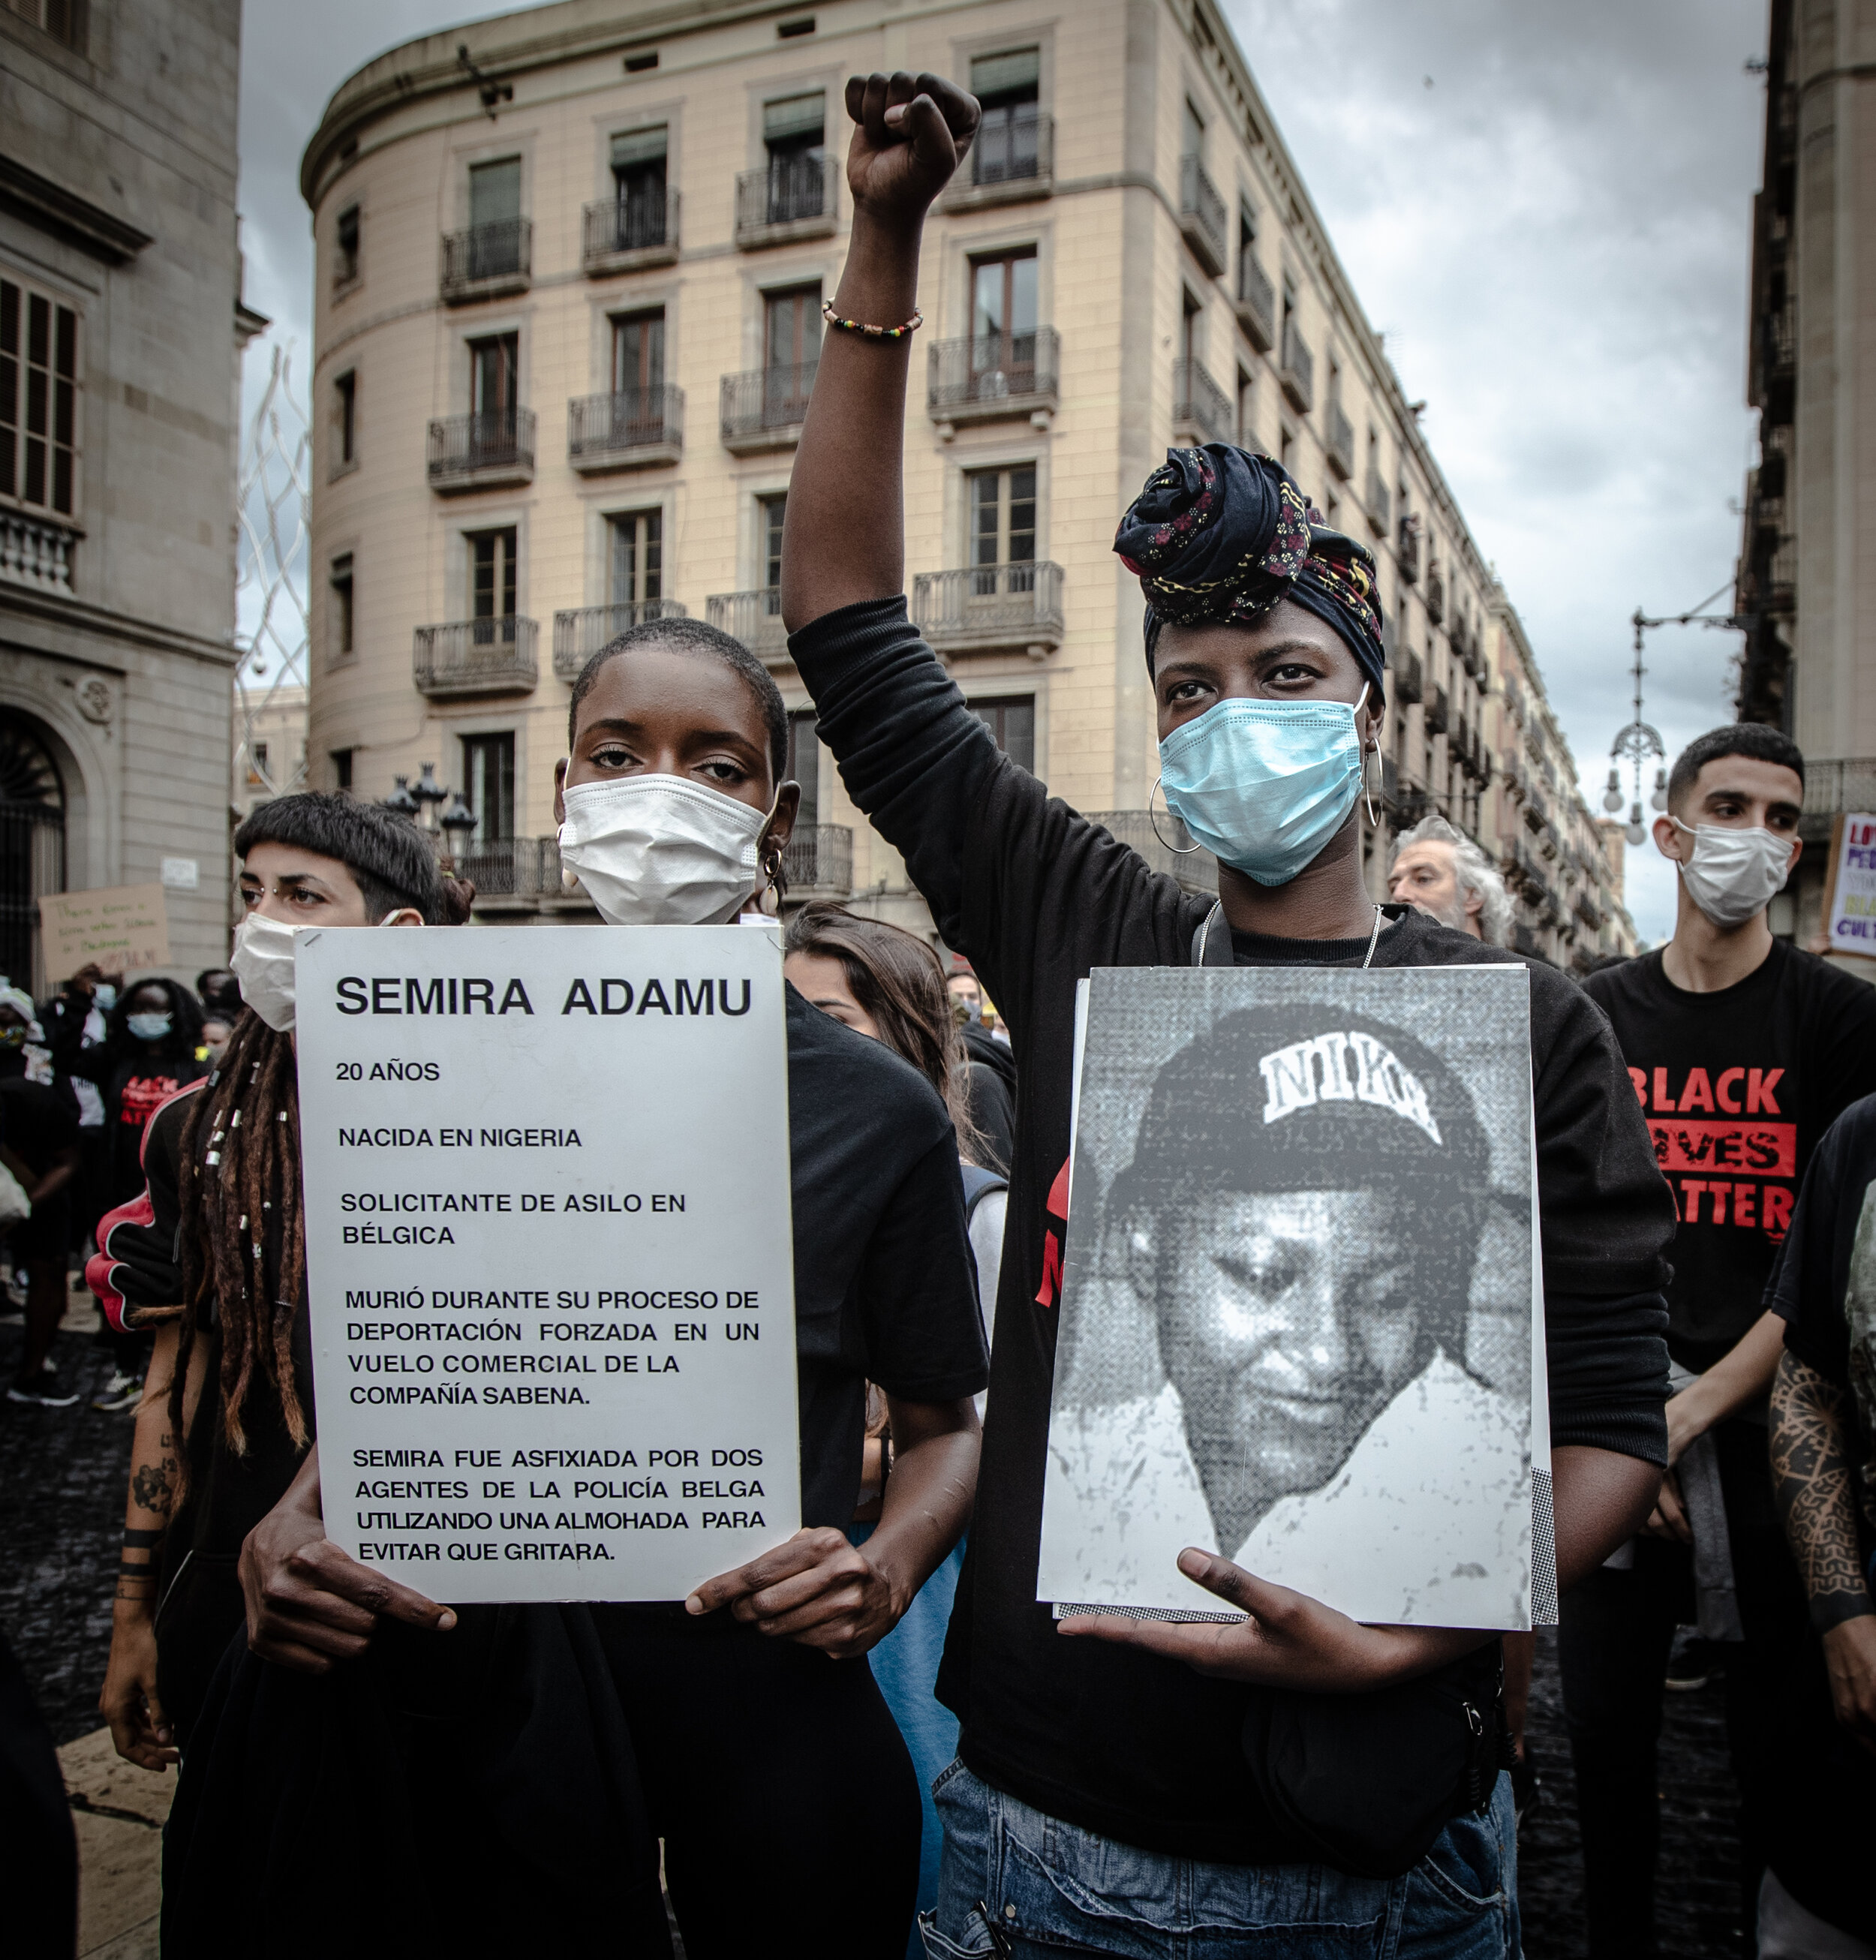  “Semira Adamou, 20 years old. Born in Nigeria. Asylum seeker in belgium. Died during her forced deportation process on a Sabena commercial flight. Semira was suffocated by two Belgian police officers using a pillow to prevent her from screaming”. BL